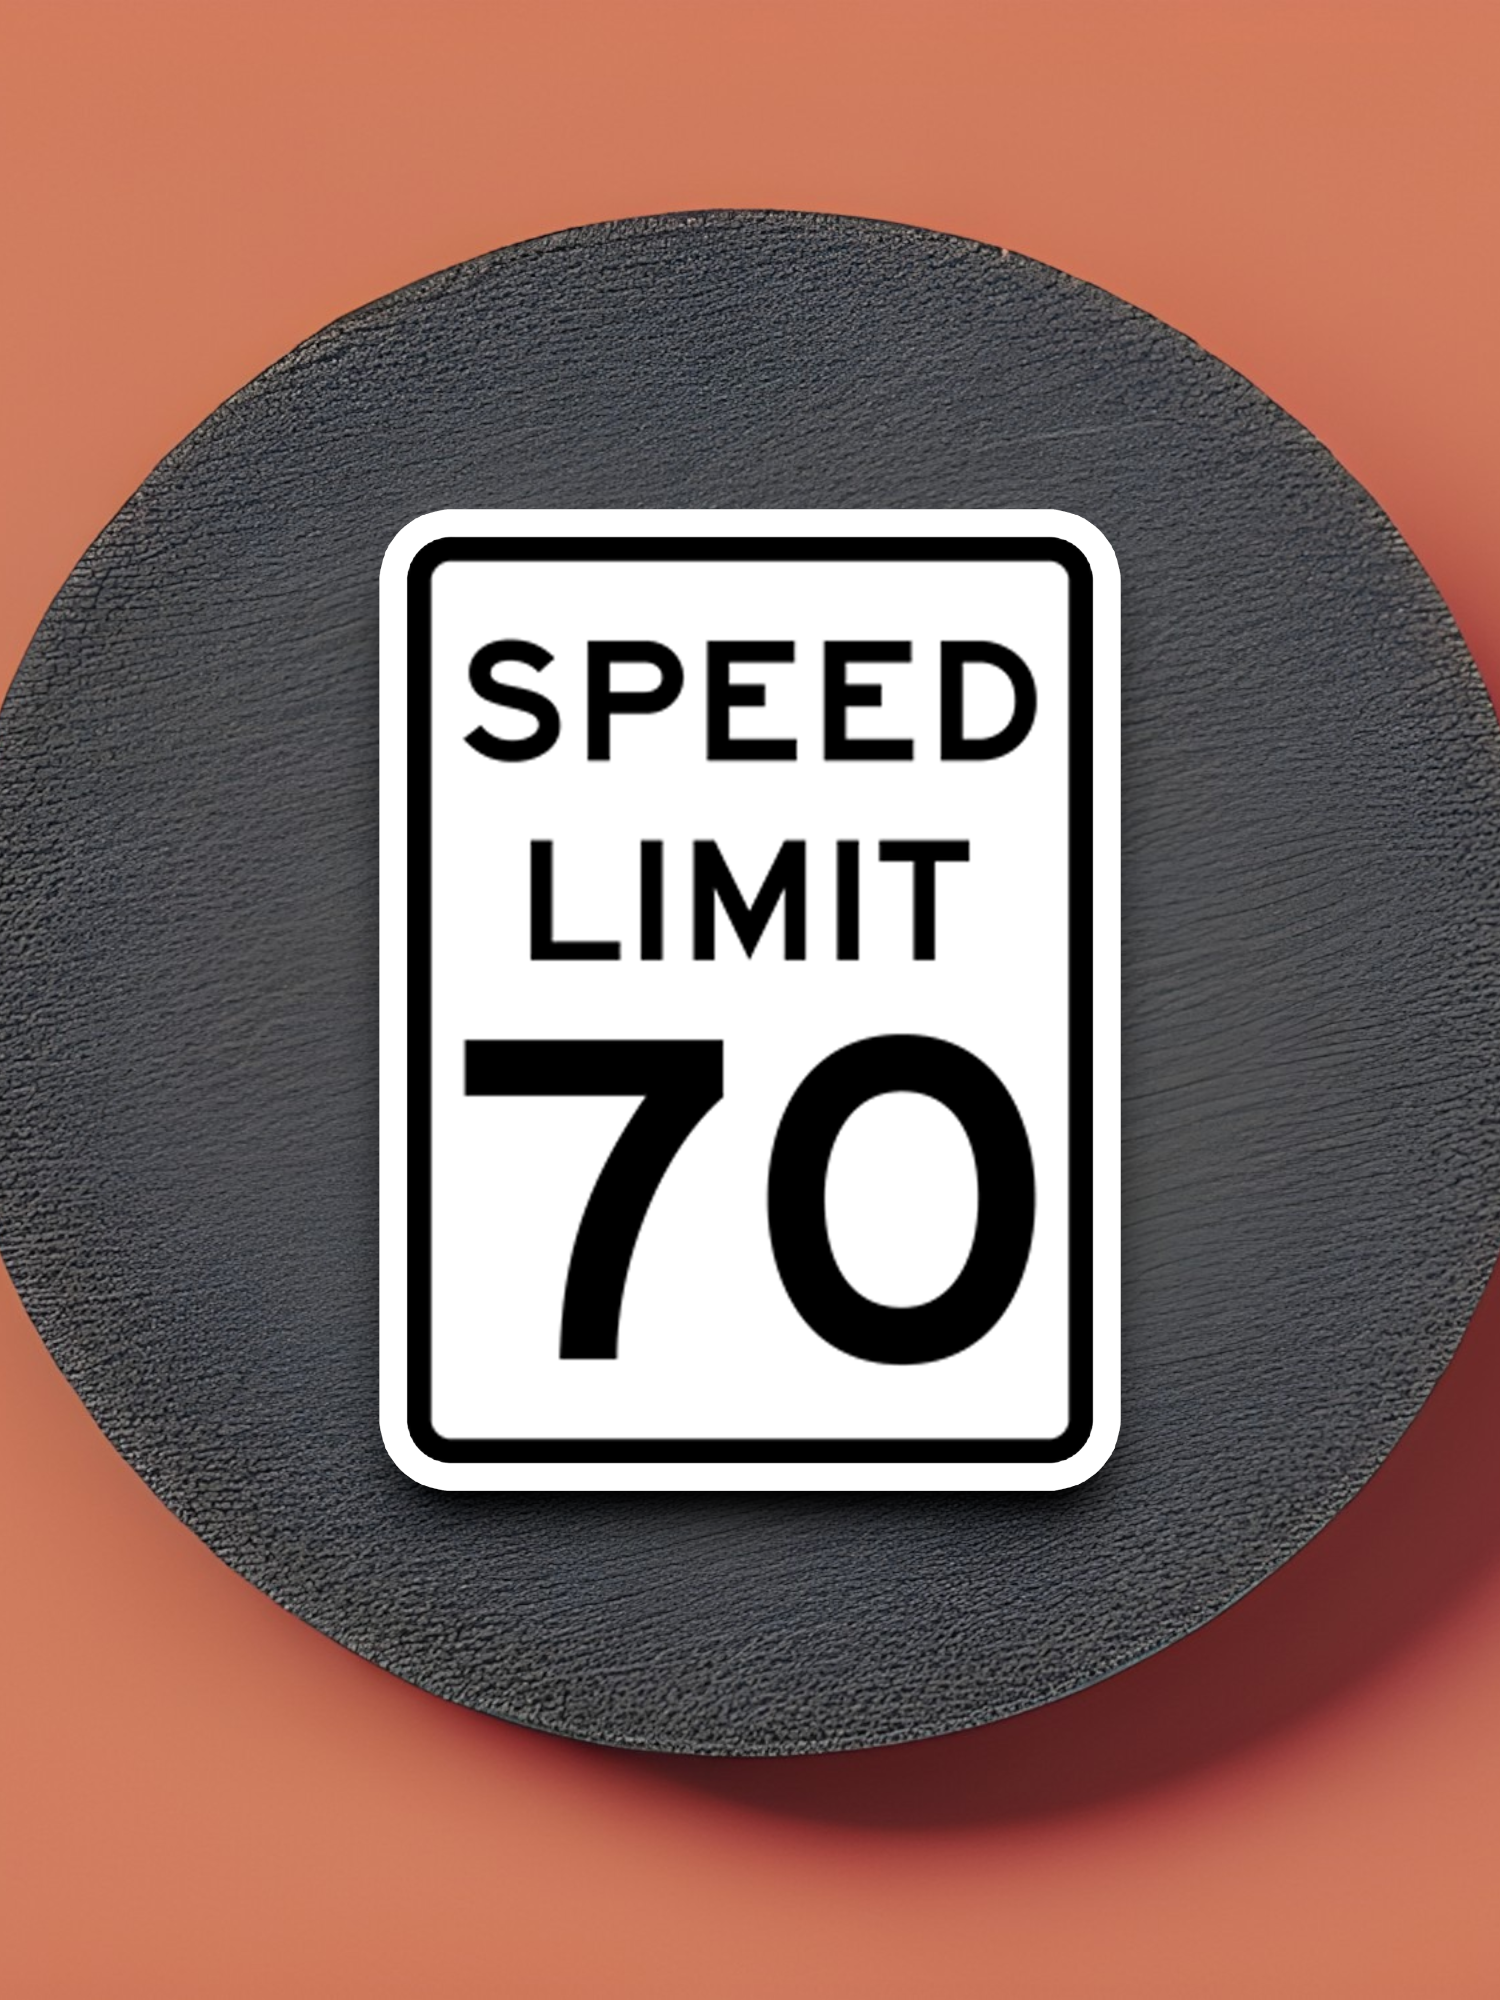 70 Miles Per Hour Speed Limit Road Sign Sticker